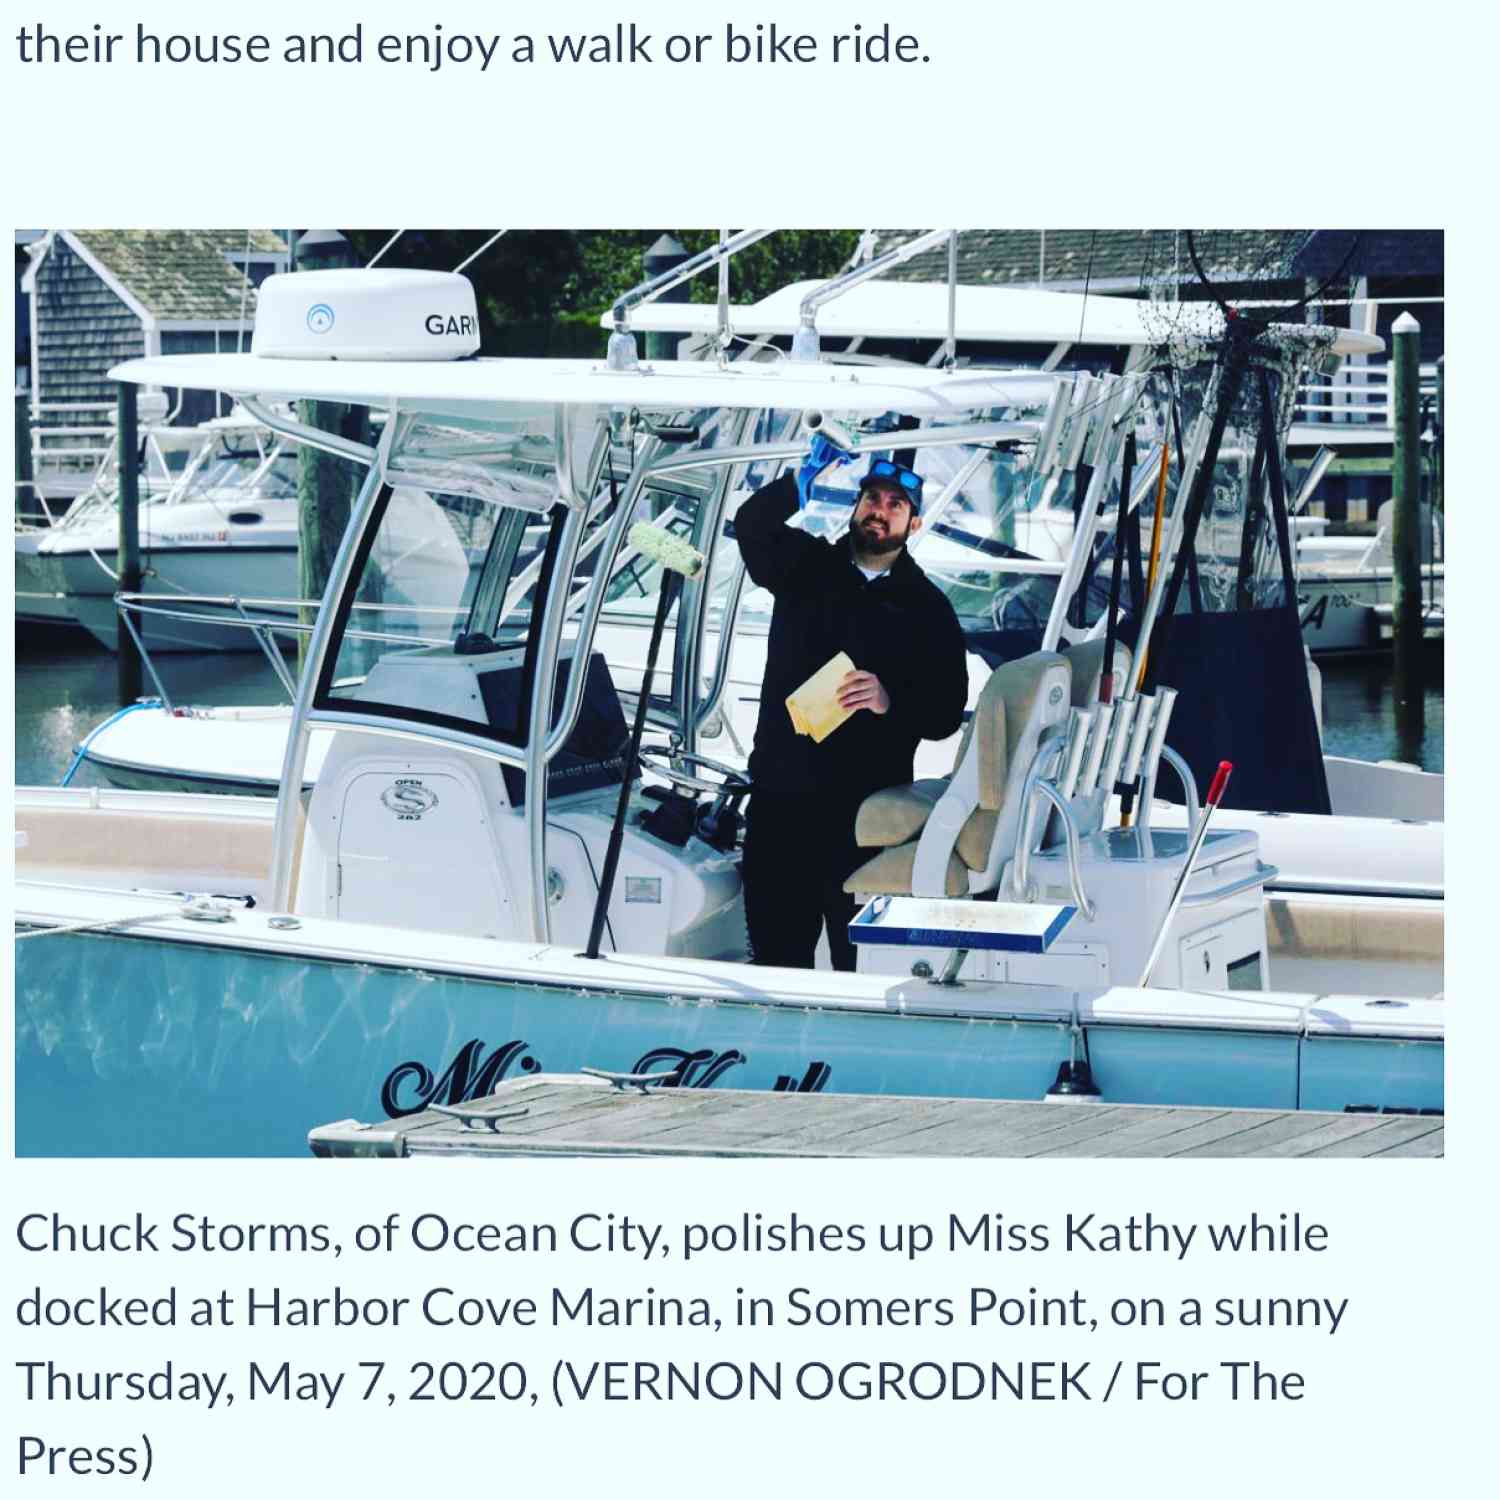 Made the Press of Atlantic City while out cleaning up the Miss Kathy